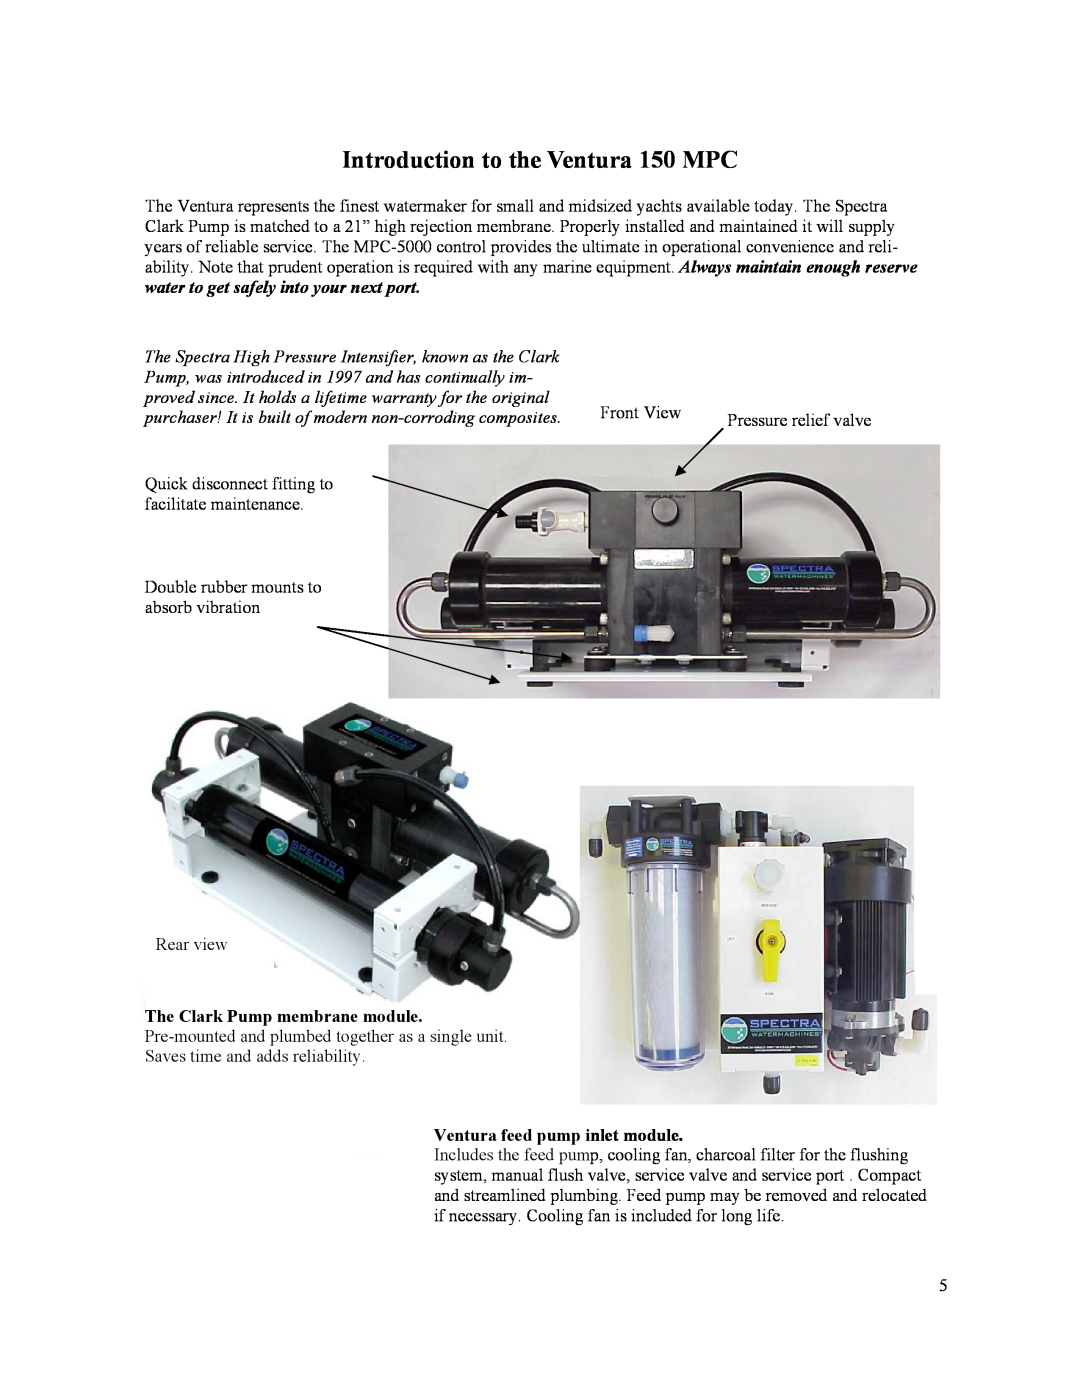 Spectra Watermakers MPC-5000 owner manual Introduction to the Ventura 150 MPC, water to get safely into your next port 